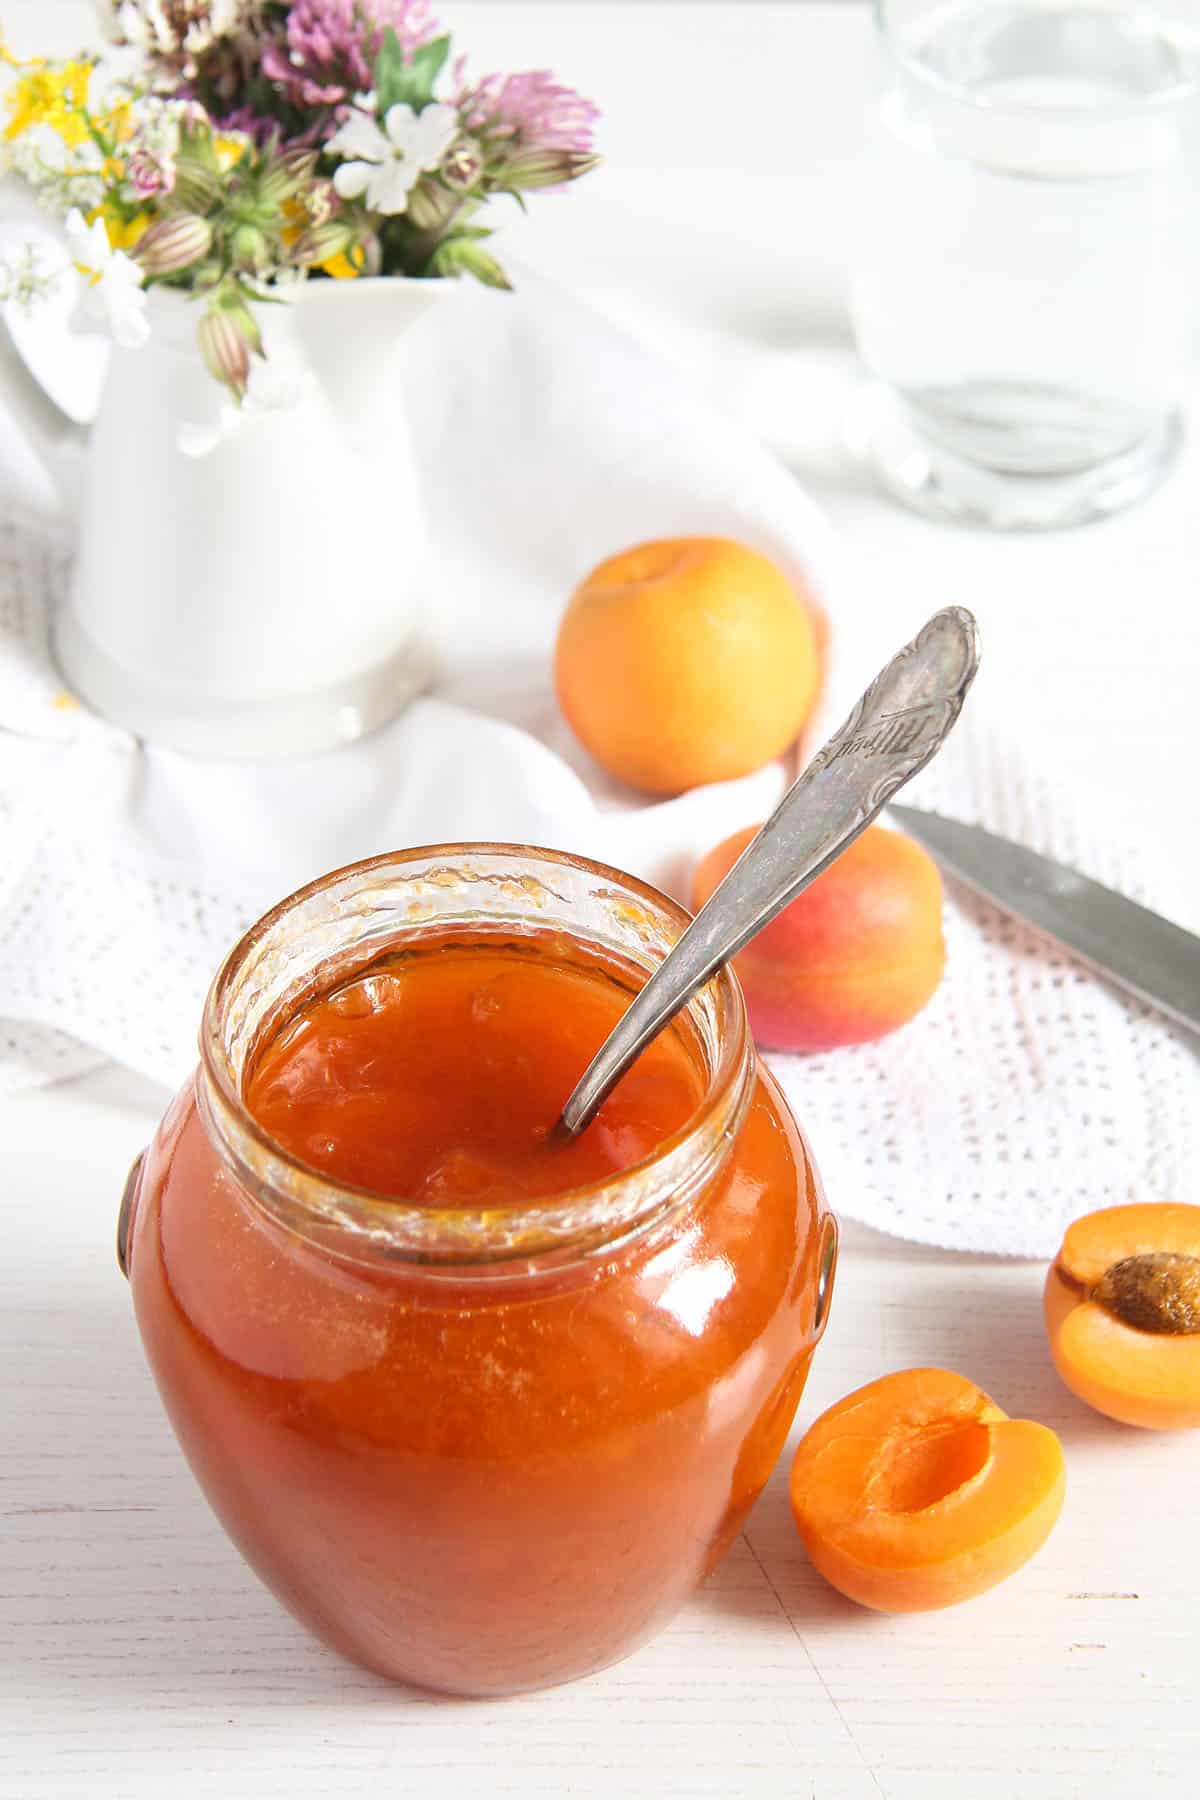 small jar of jam with a spoon in it and a few small apricots around it.